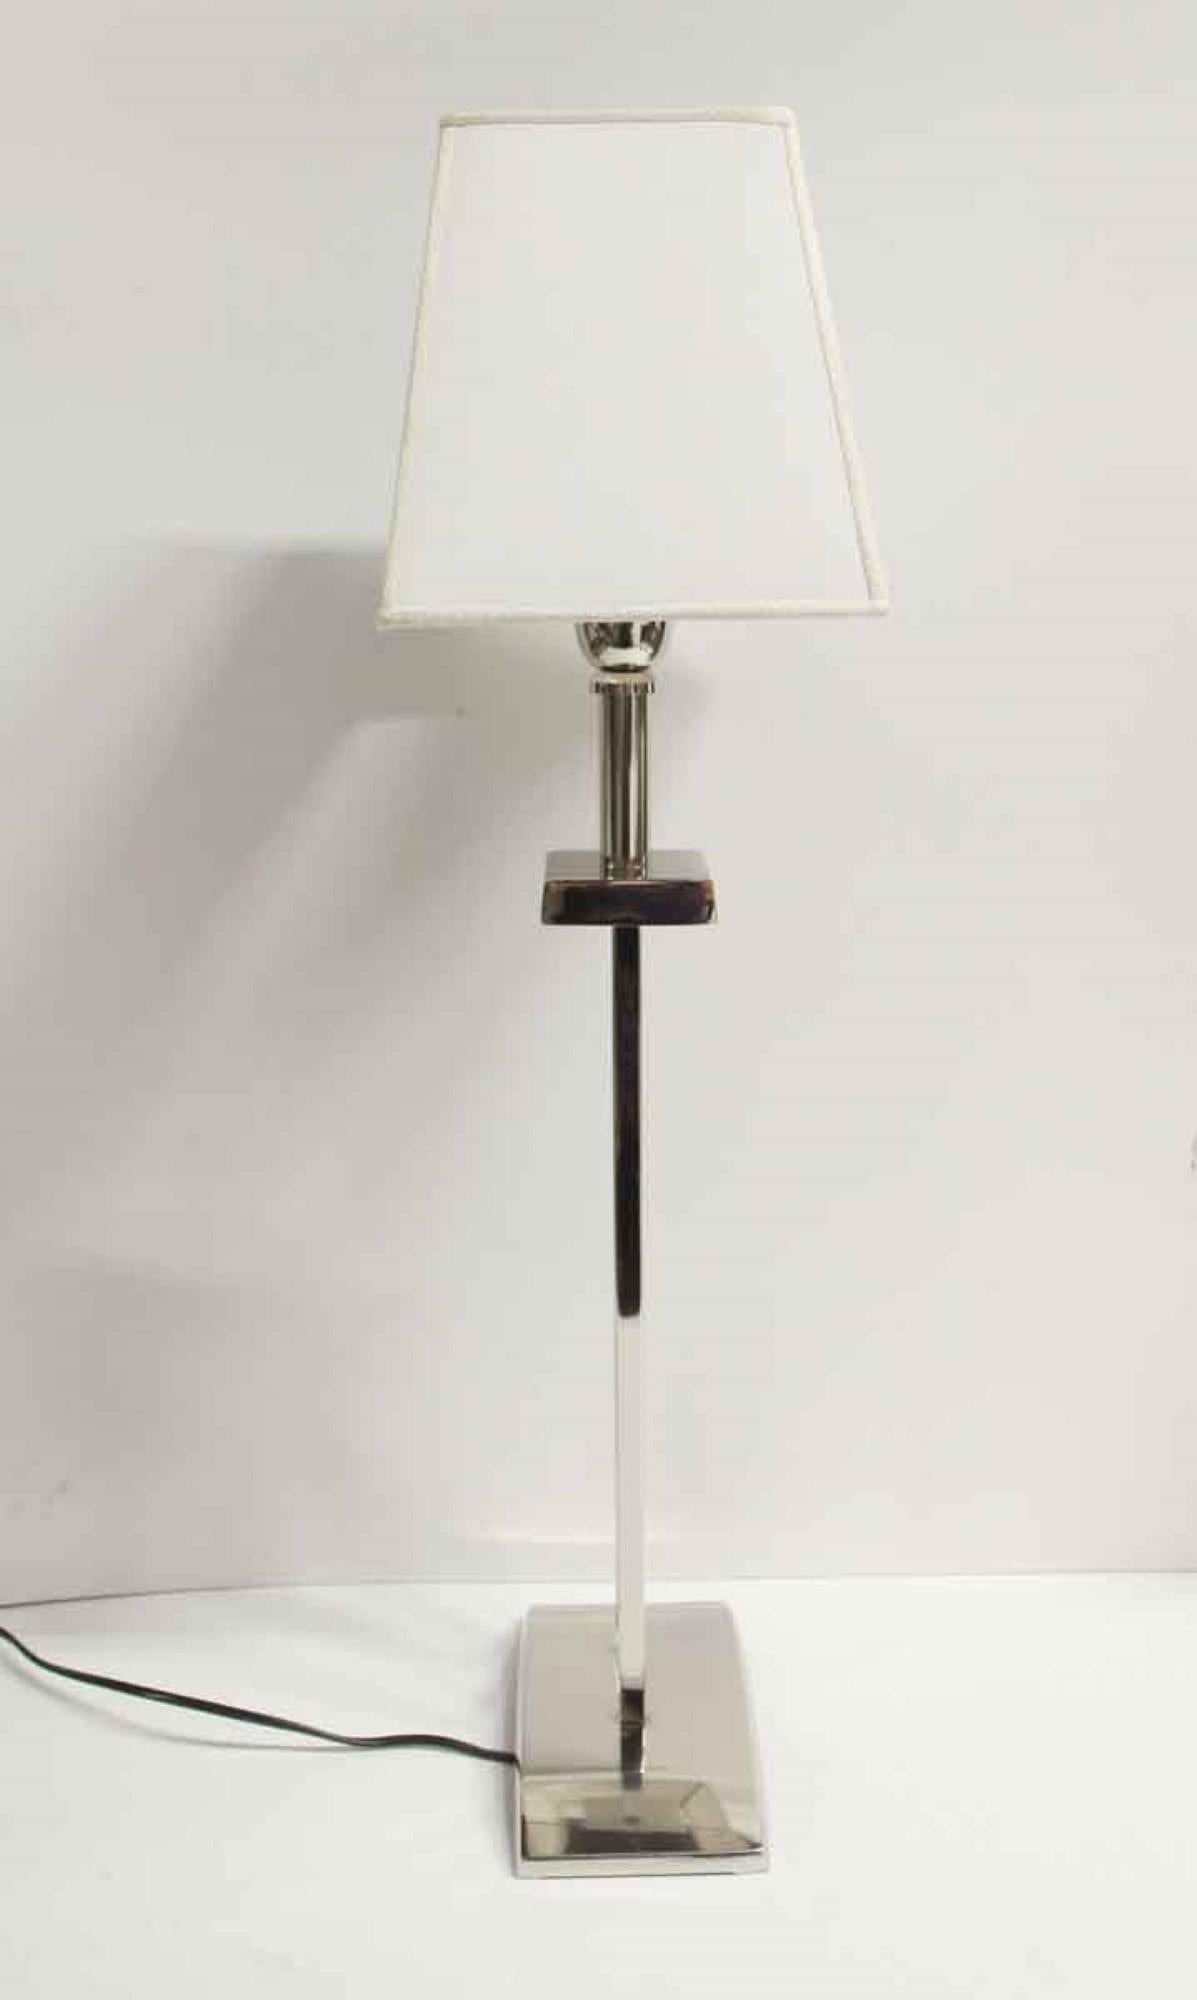 Mid-Century Modern chrome plated table lamp with a modern white shade. Small quantity available at time of posting. Please inquire. Priced each. Does not include lampshade. Please note, this item is located in one of our NYC locations.